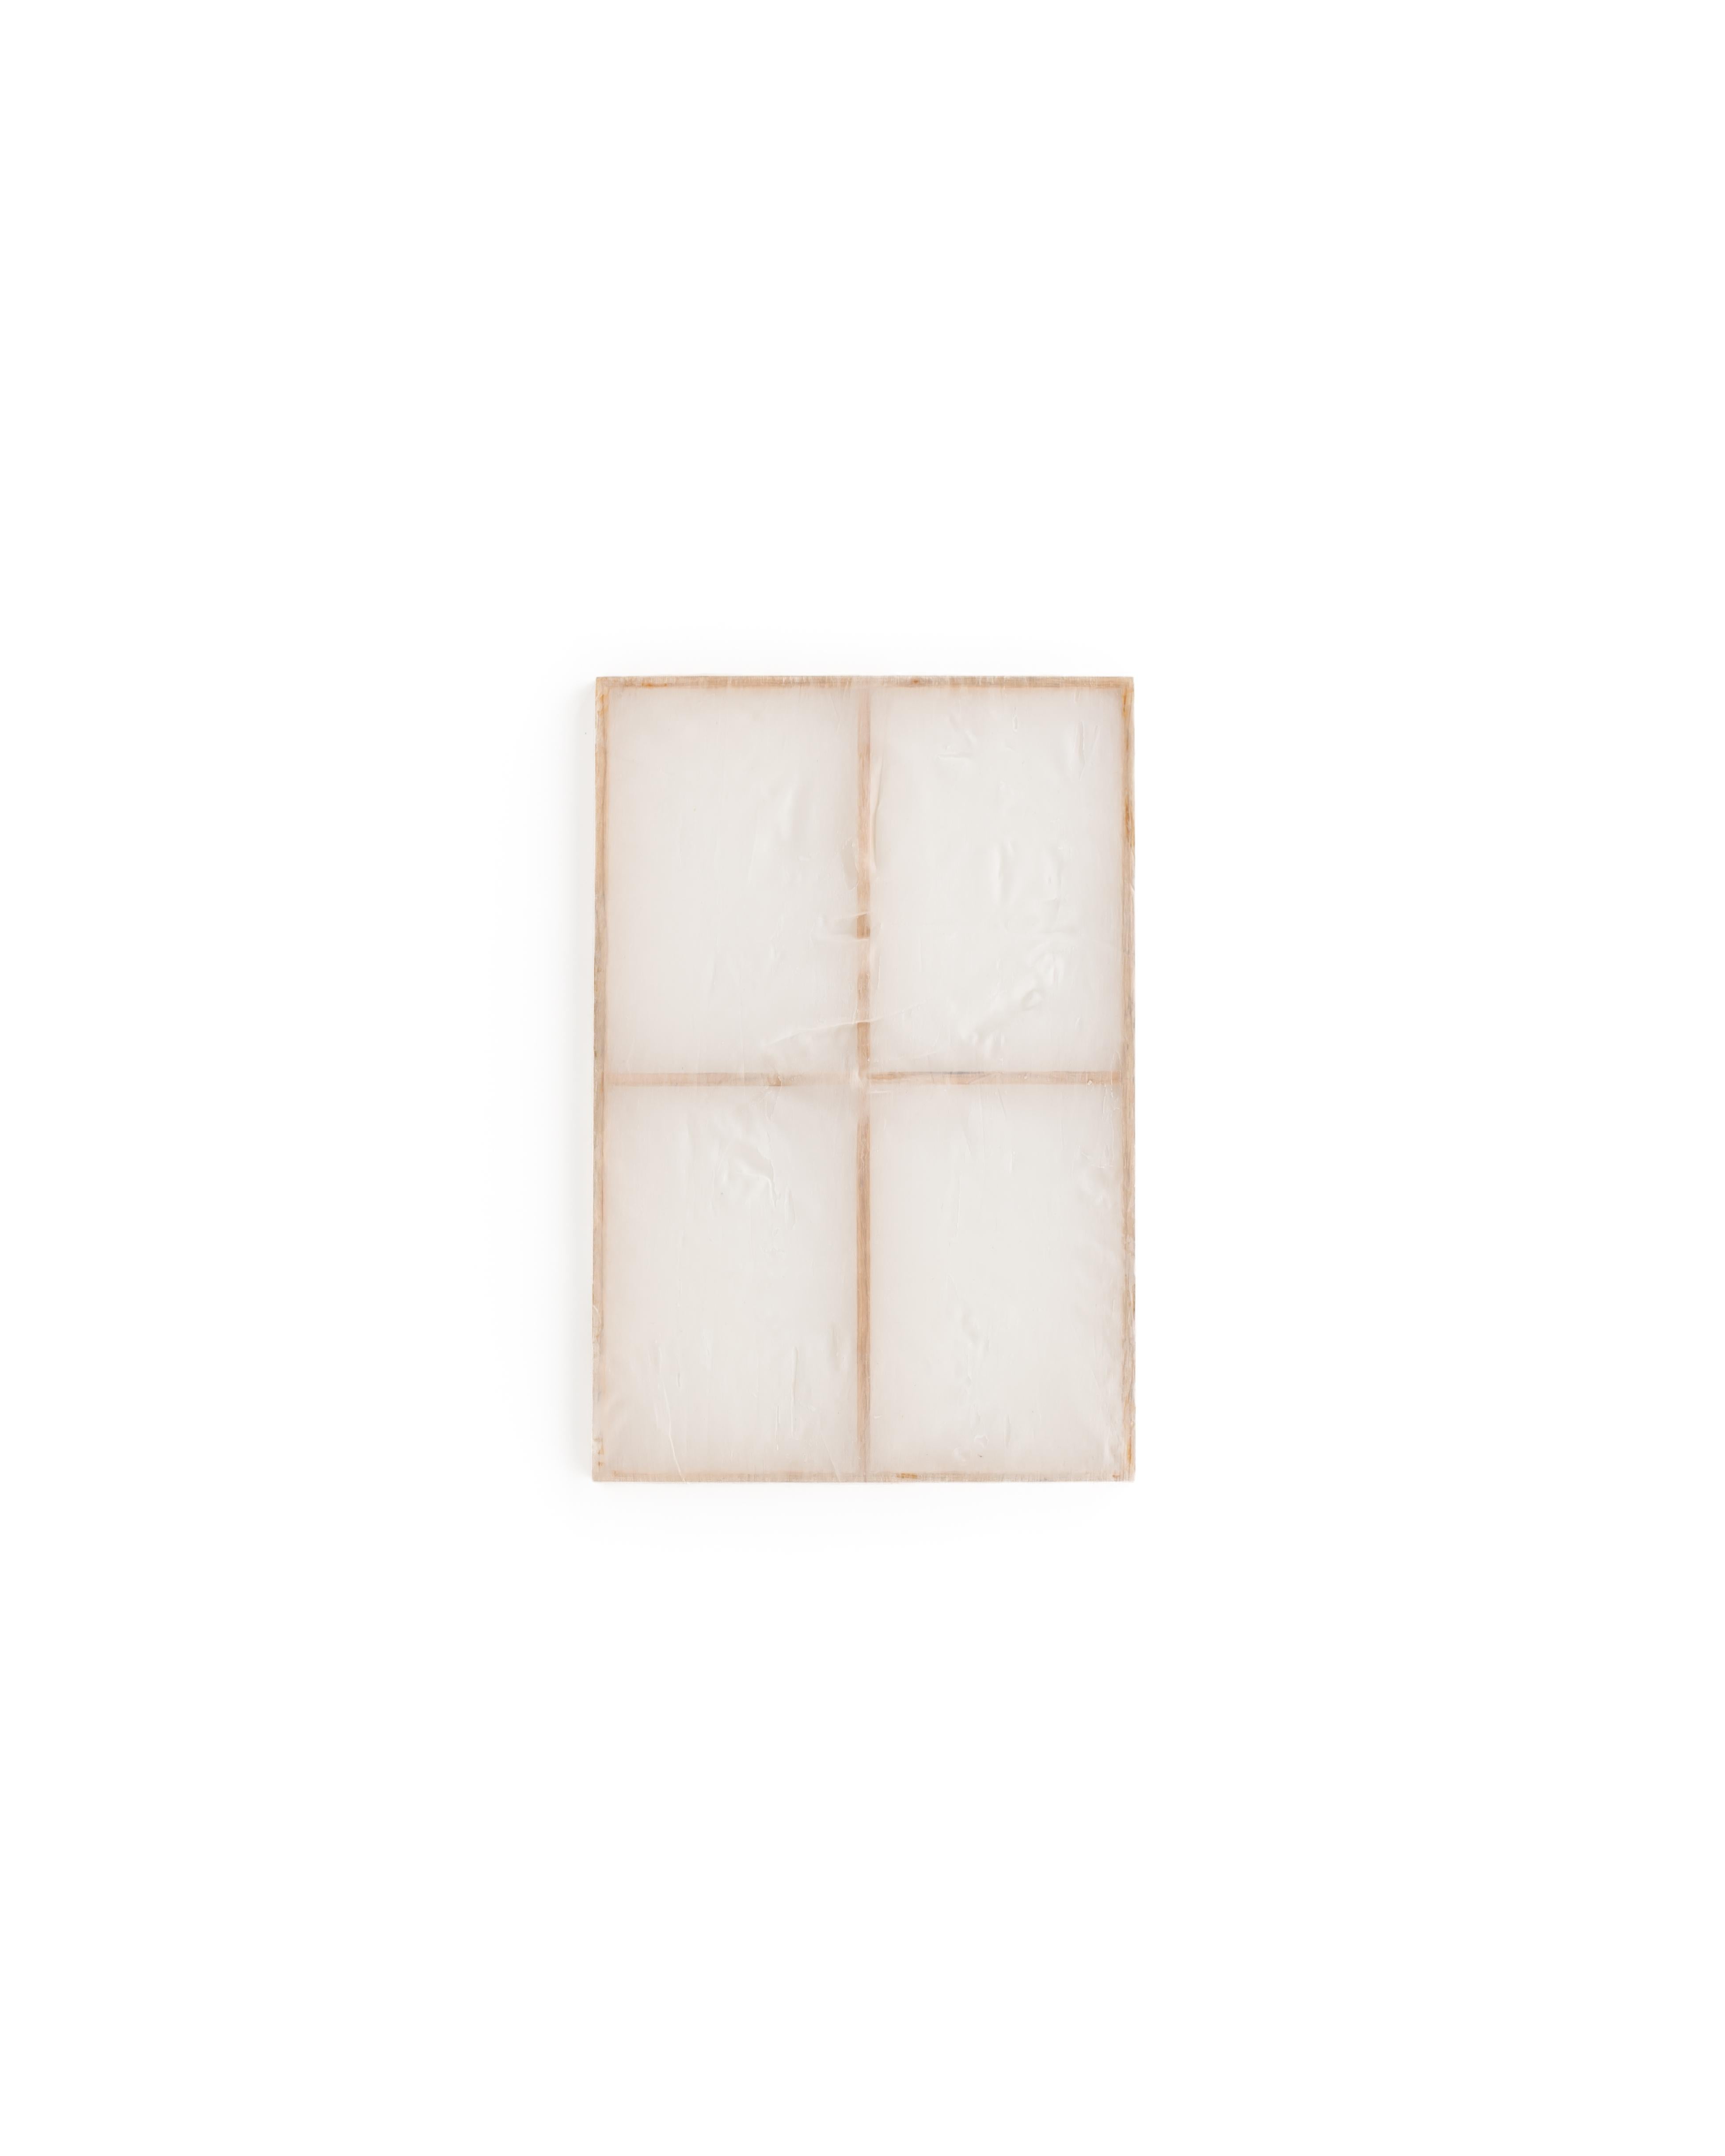 Cristina Loya Domingo Abstract Painting - UNTITLED 0.8 – beeswax on linen, natural materials, ecologies, minimal/abstract 